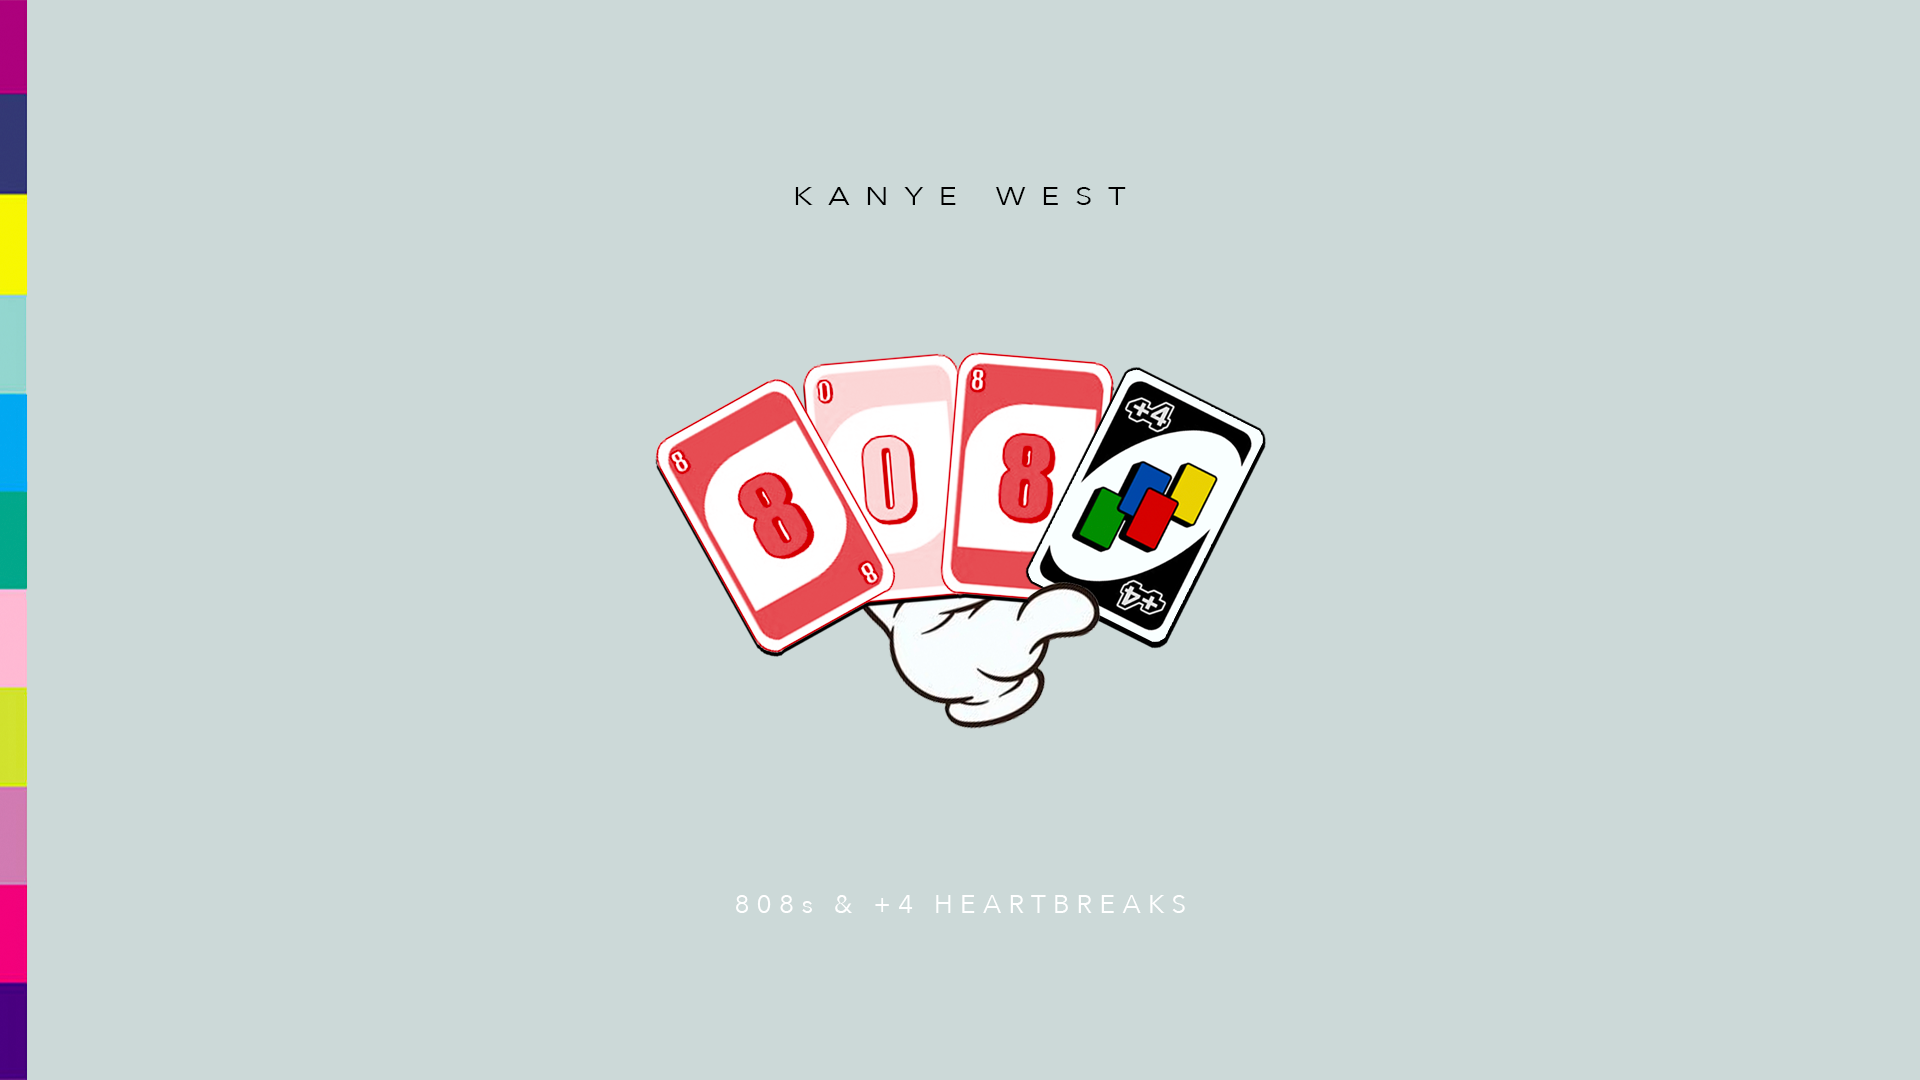 Sorry for the wait, 808s and +4 heartbreaks Wallpaper (1920 x 1080): Kanye